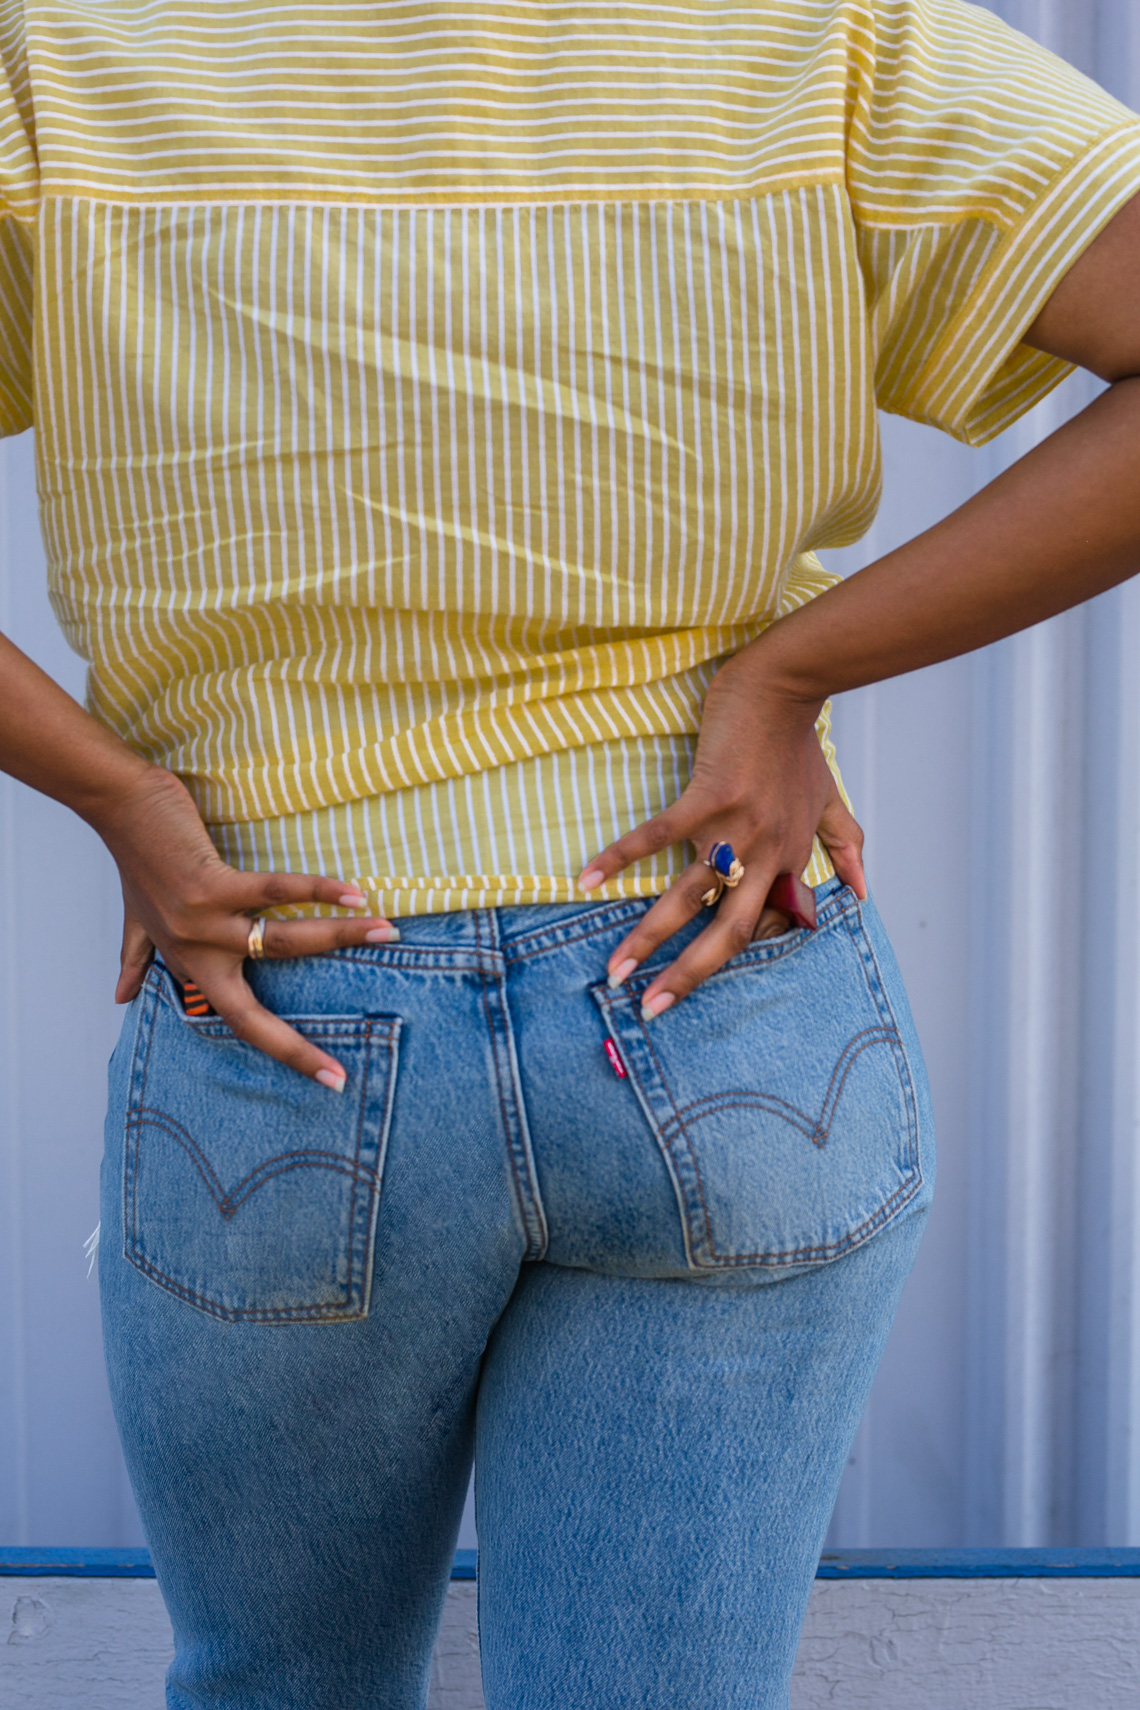 levis wedgie fit jeans-rsee-summer outfit idea-wear who you are-butt